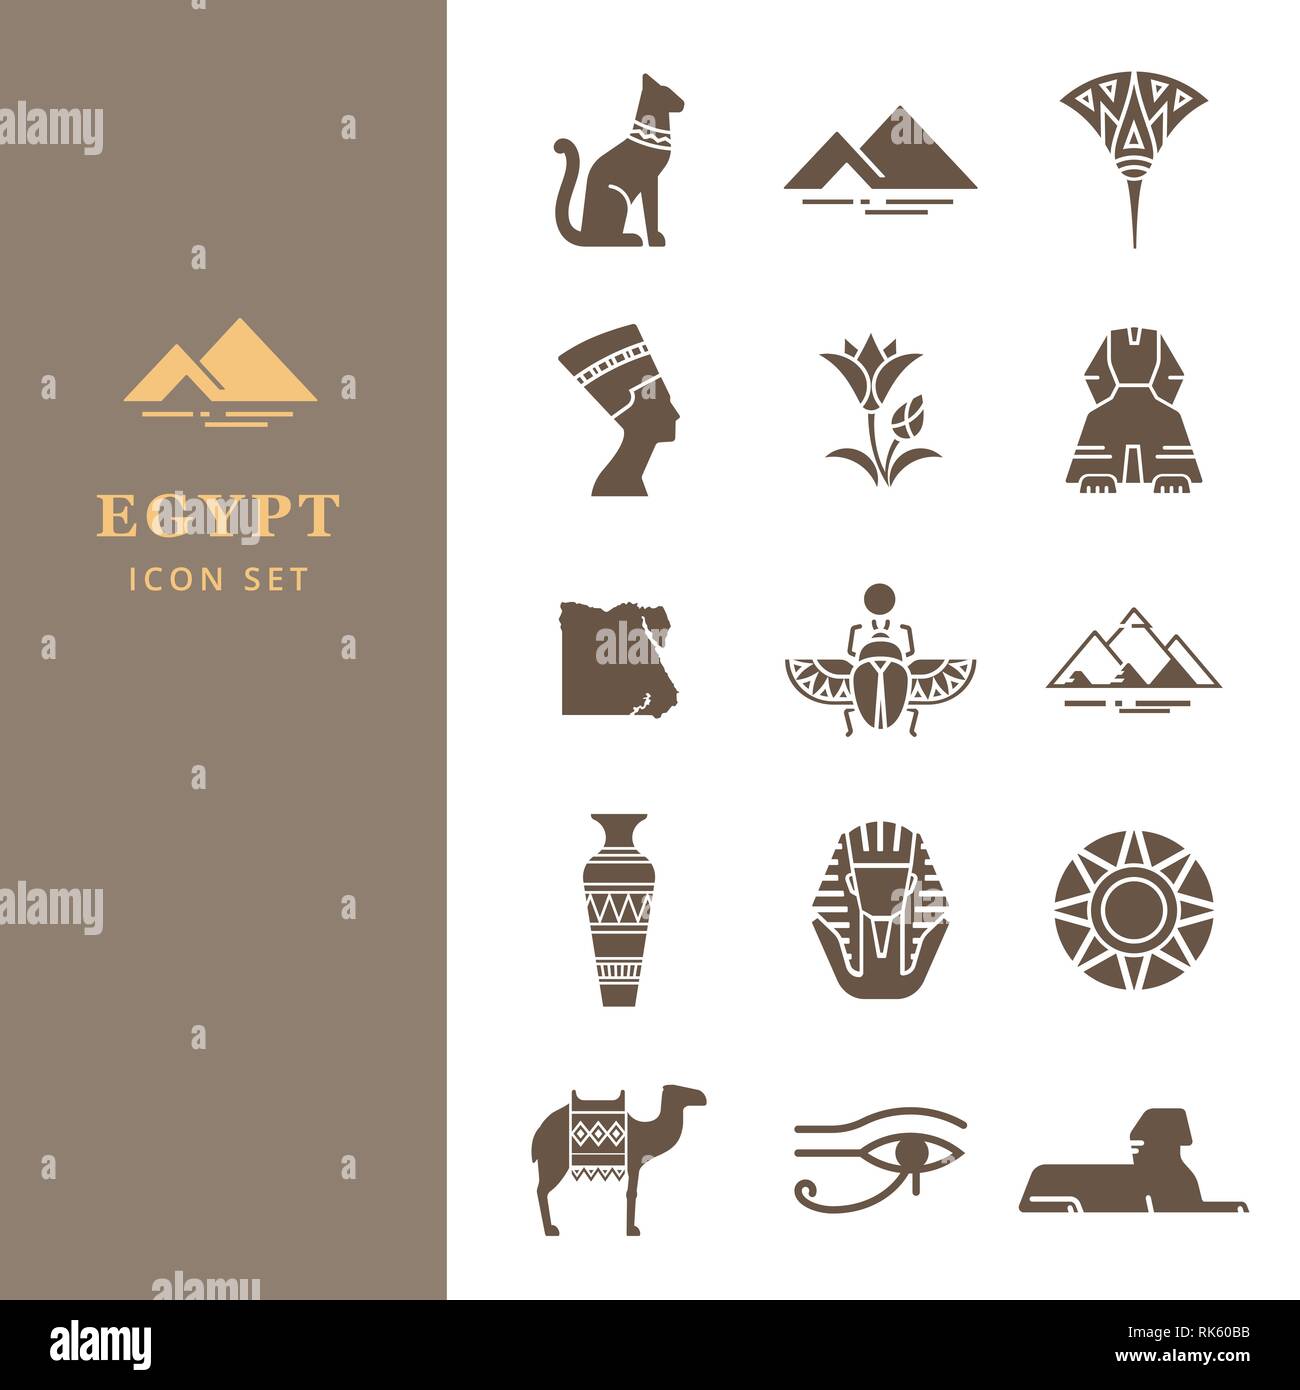 Egyptian icon set for a logo, website design, printing products and more. Classic elements of Egypt. Stock Vector